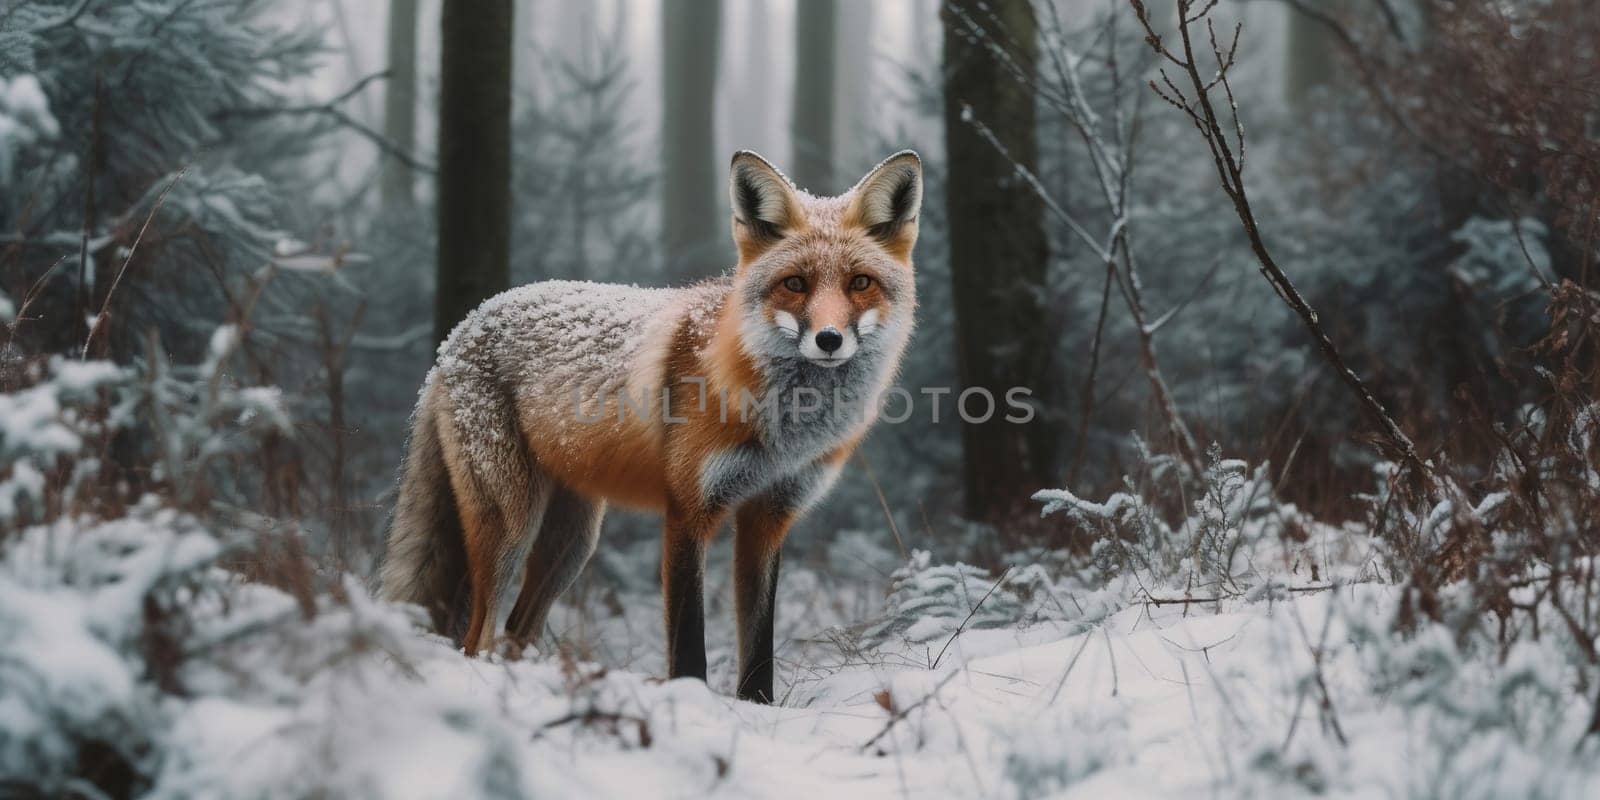 Red Fox In The Winter Forest On A Hunting, Animal In Natural Habitat